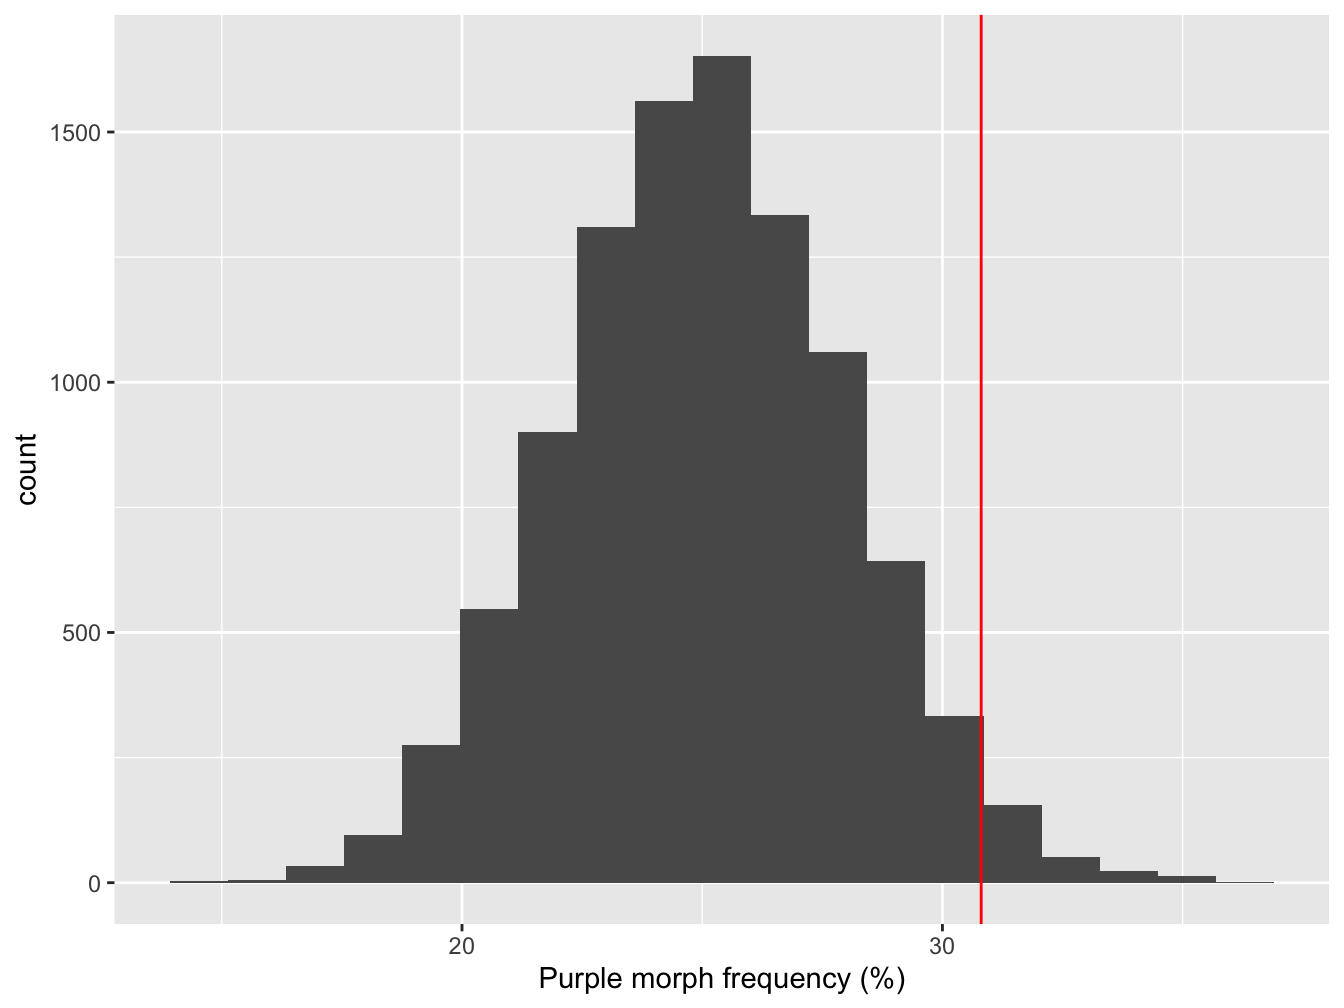 Sampling distribution of purple morph frequency under the null hypothesis